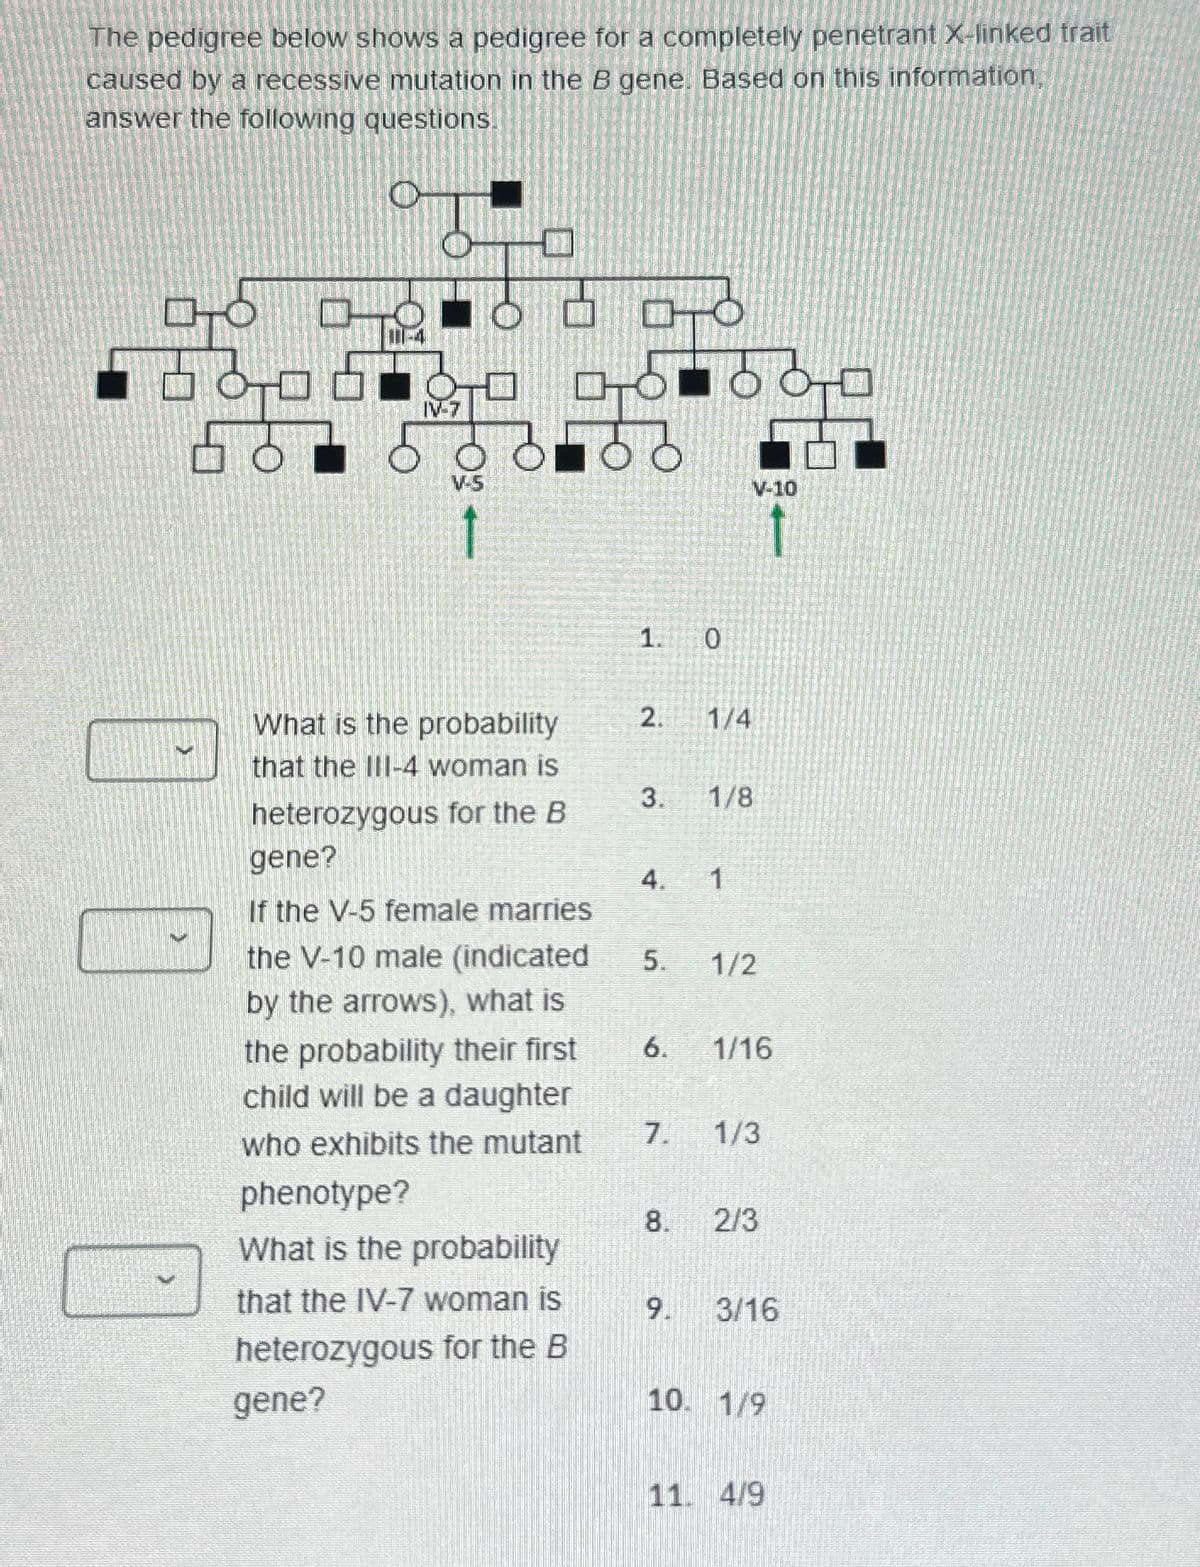 The pedigree below shows a pedigree for a completely penetrant X-linked trait
caused by a recessive mutation in the B gene. Based on this information,
answer the following questions.
0
25
V-5
What is the probability
that the III-4 woman is
heterozygous for the B
gene?
If the V-5 female marries
the V-10 male (indicated
by the arrows), what is
the probability their first
child will be a daughter
who exhibits the mutant
phenotype?
What is the probability
that the IV-7 woman is
heterozygous for the B
gene?
1. 0
2. 1/4
3. 1/8
4. 1
V-10
1
5.
1/2
6. 1/16
7. 1/3
8. 2/3
9. 3/16
10. 1/9
11. 4/9
10